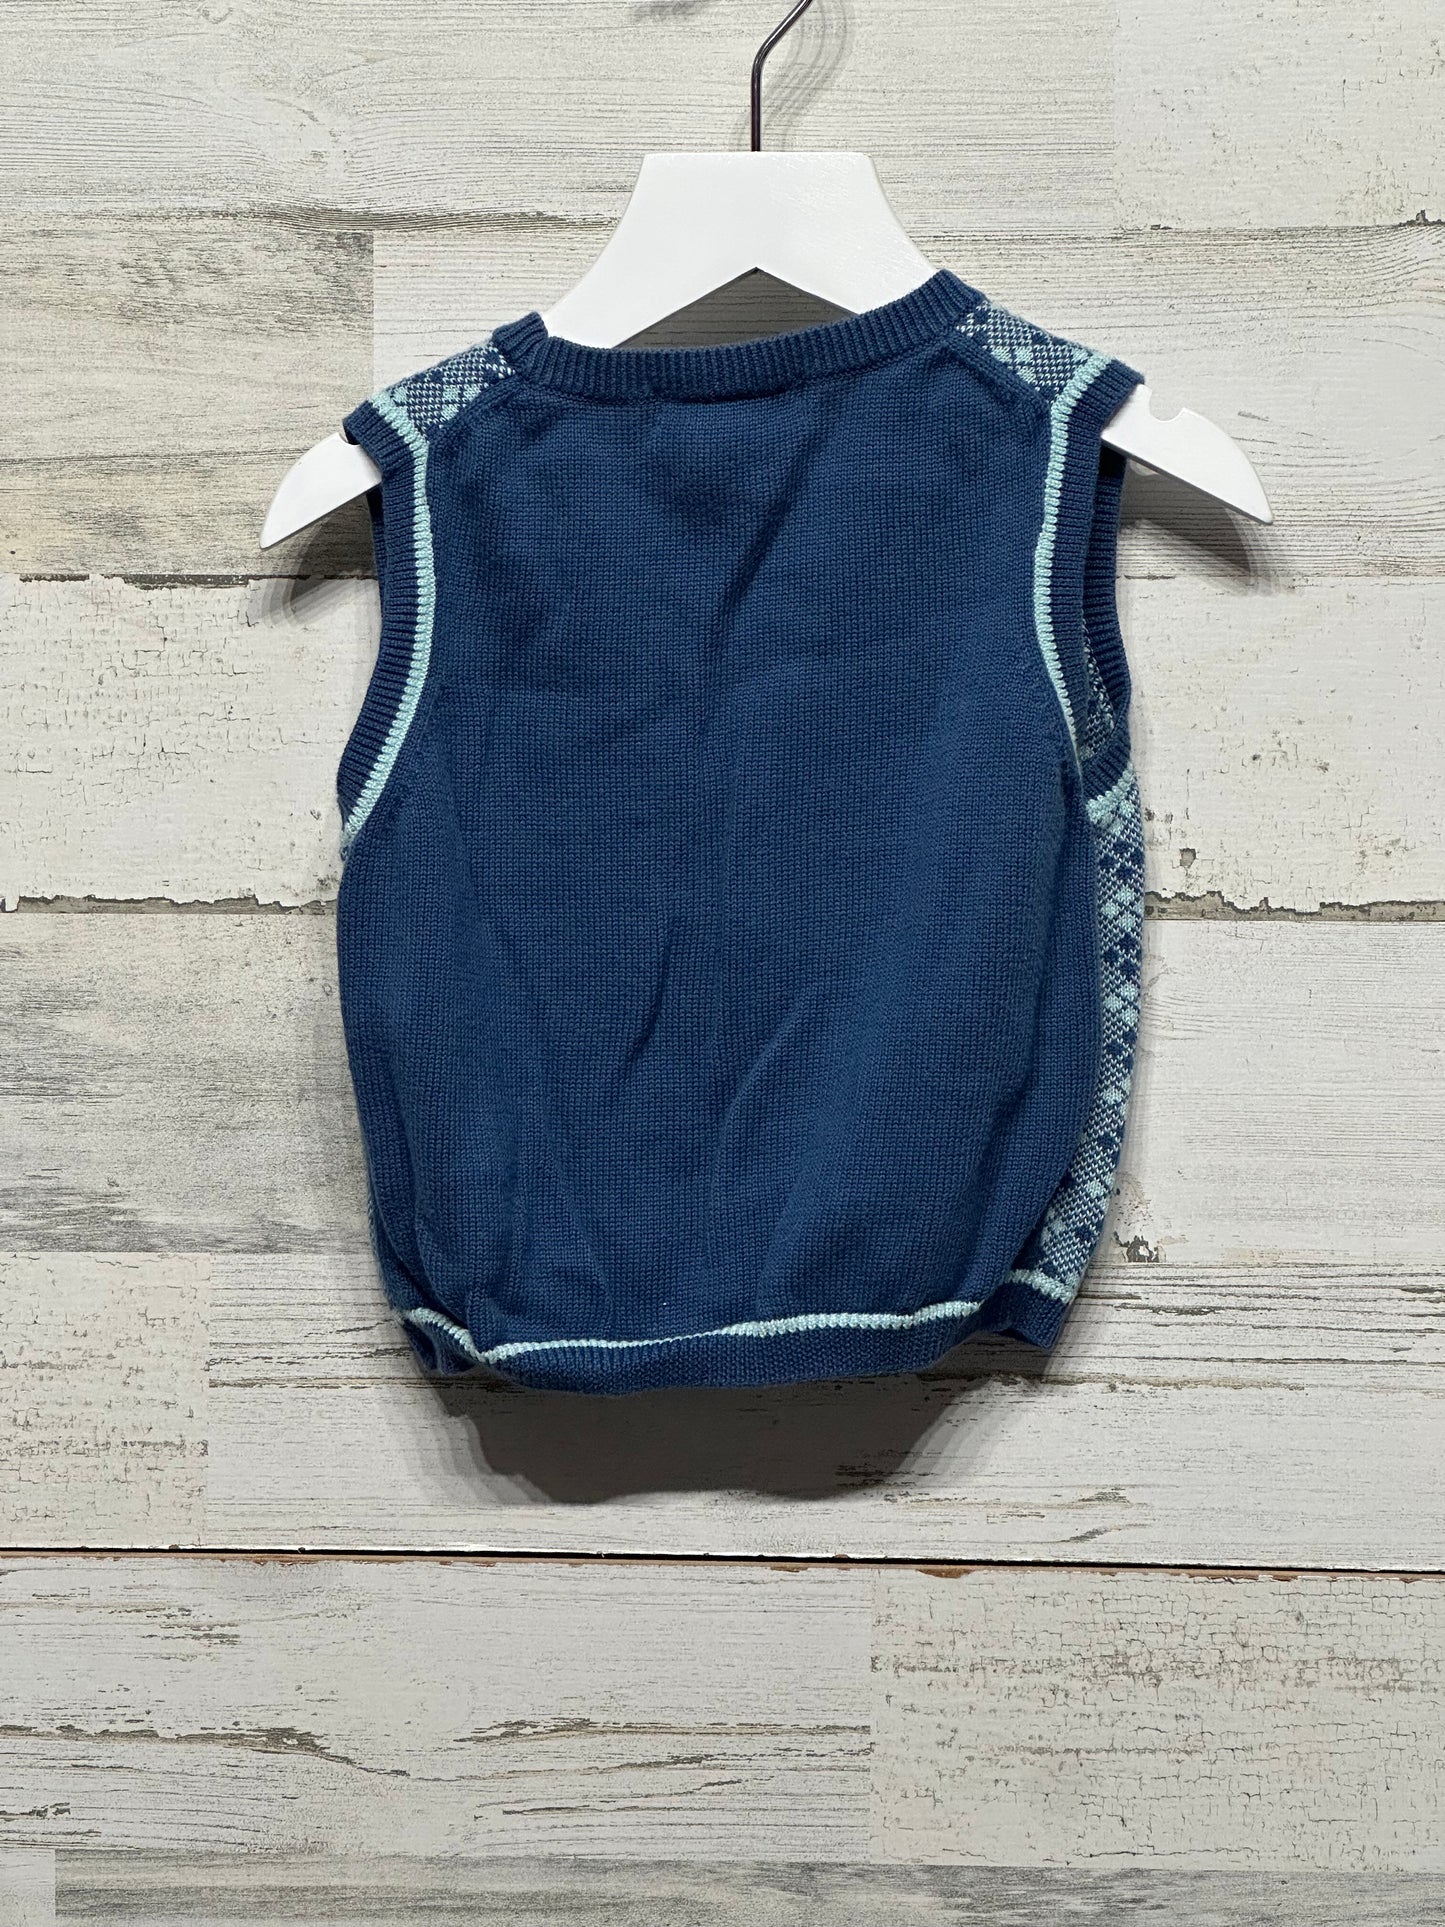 Boys Size 12-18m Janie and Jack Layette Vest - Good Used Condition